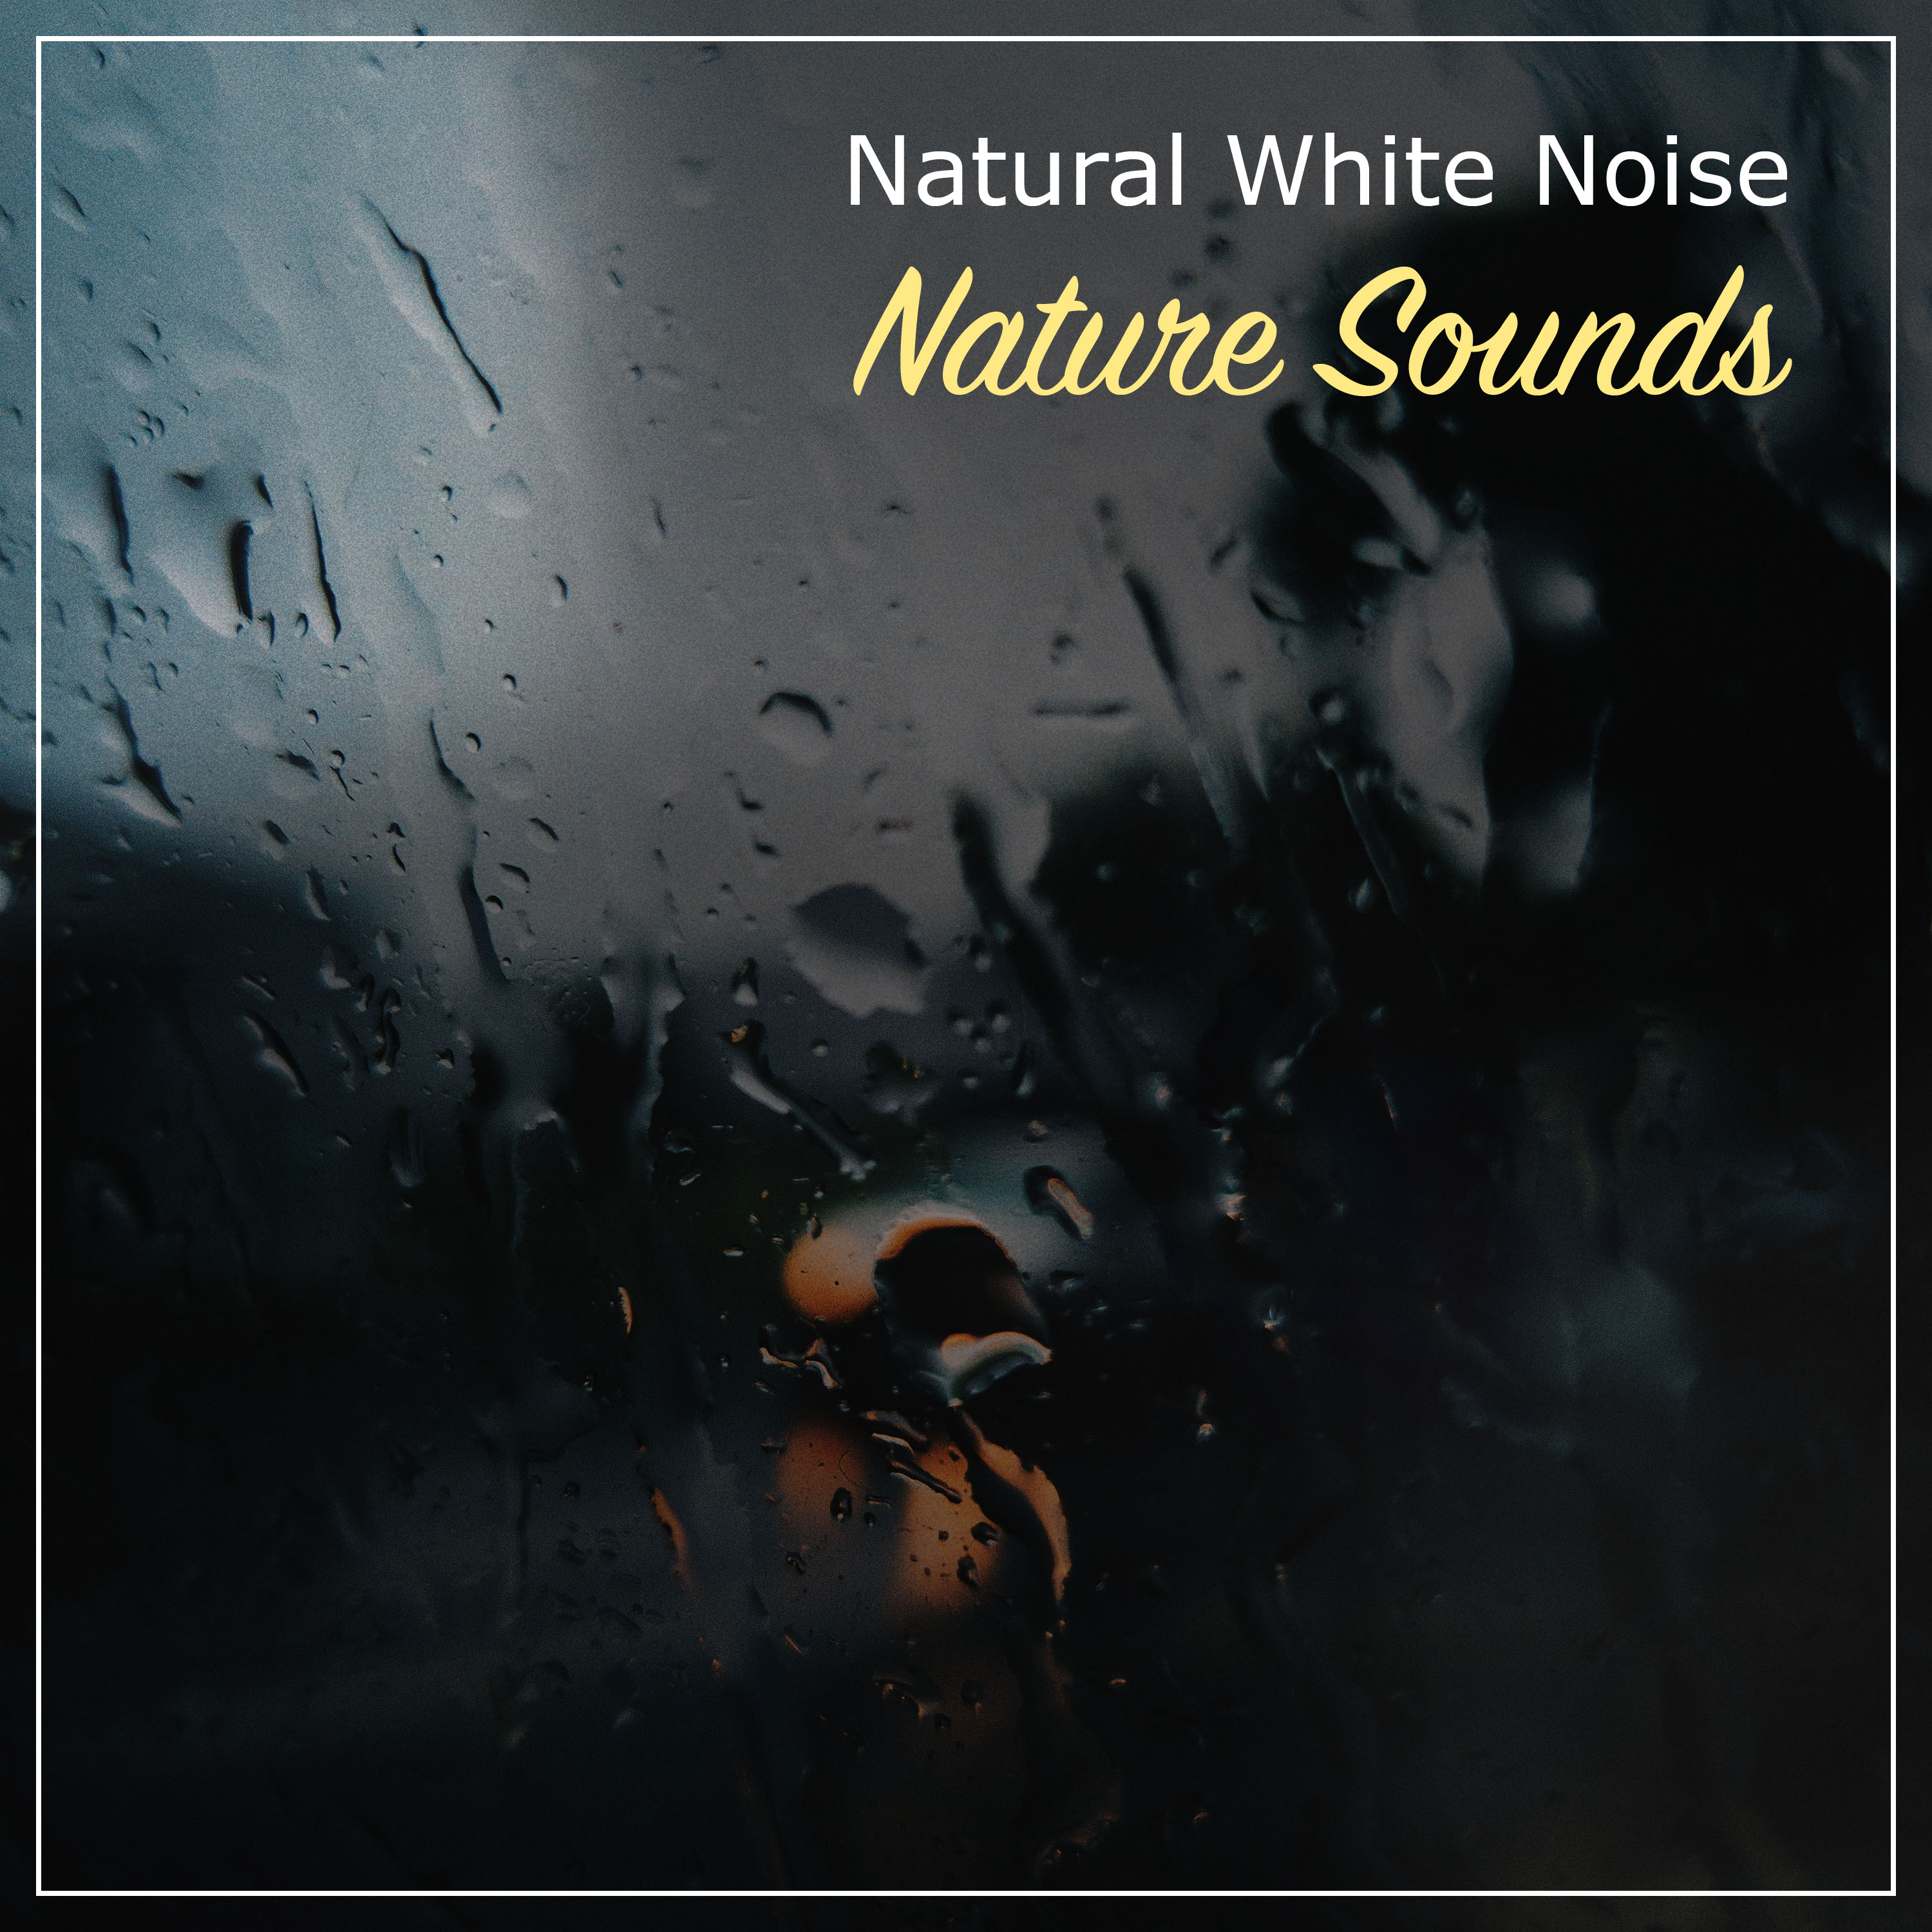 10 Natural White Noise and Nature Sounds, Lullaby Sleep